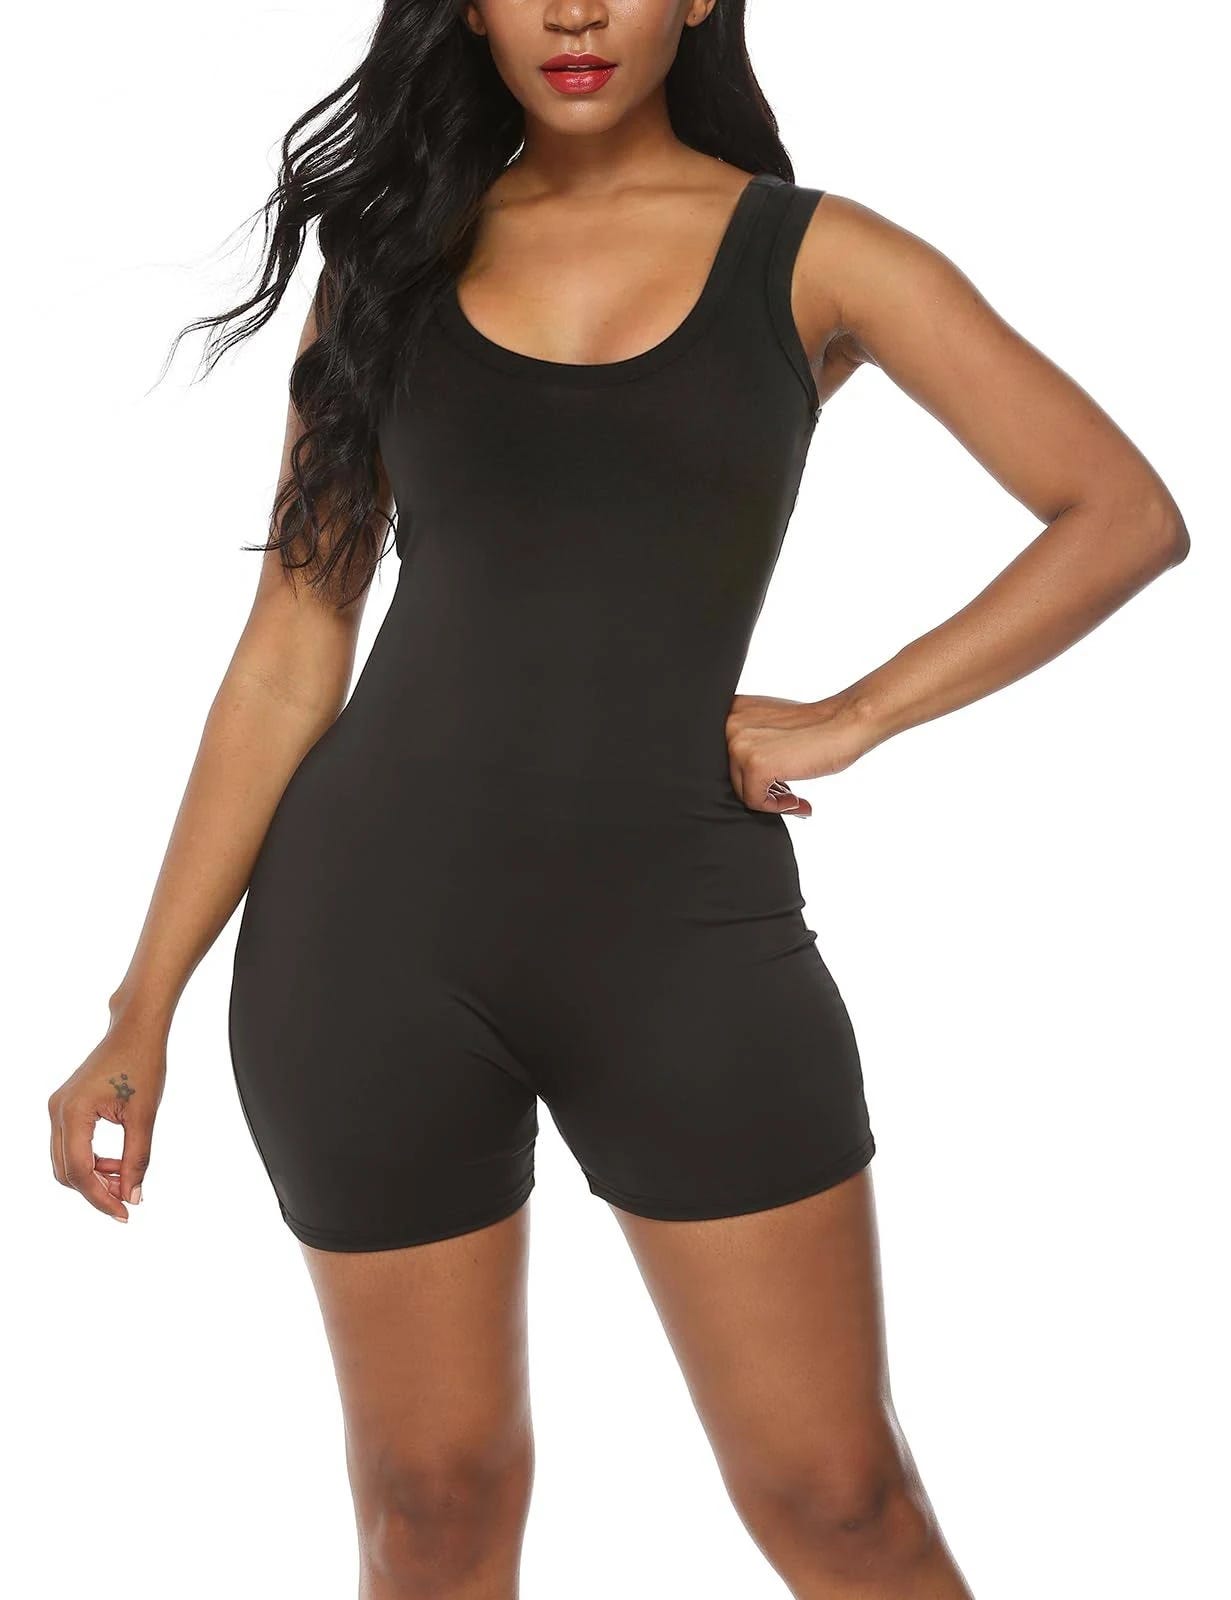 One-Piece Black Outfit for Women | Image